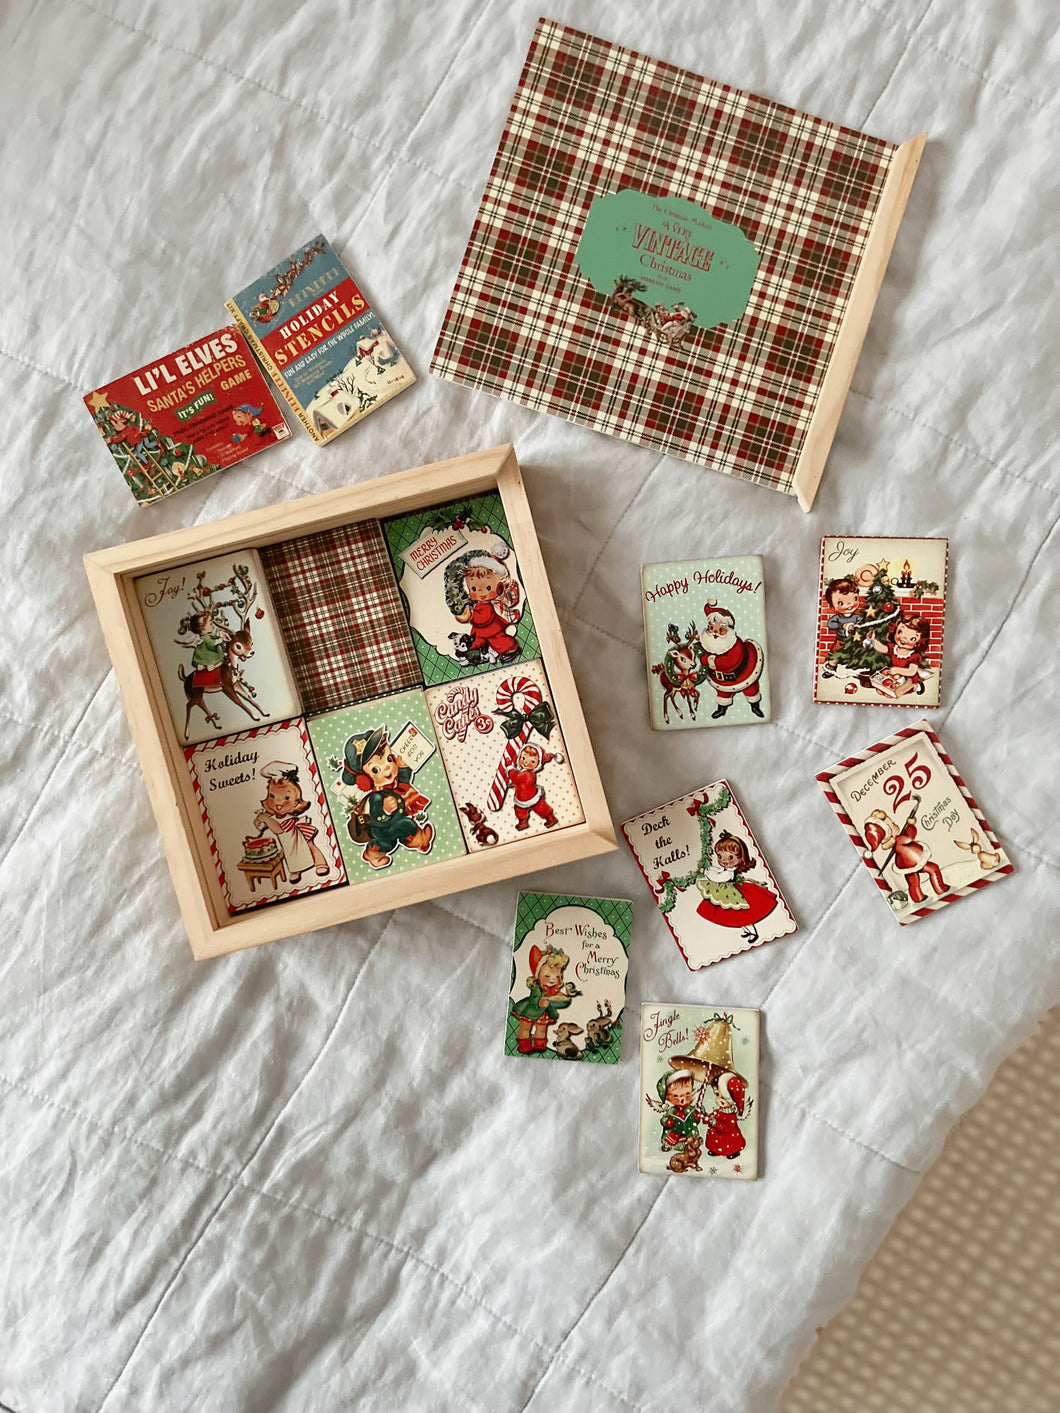 PRE ORDER - ‘A Very Vintage Christmas’ Wooden Memory Game (6582709878850)